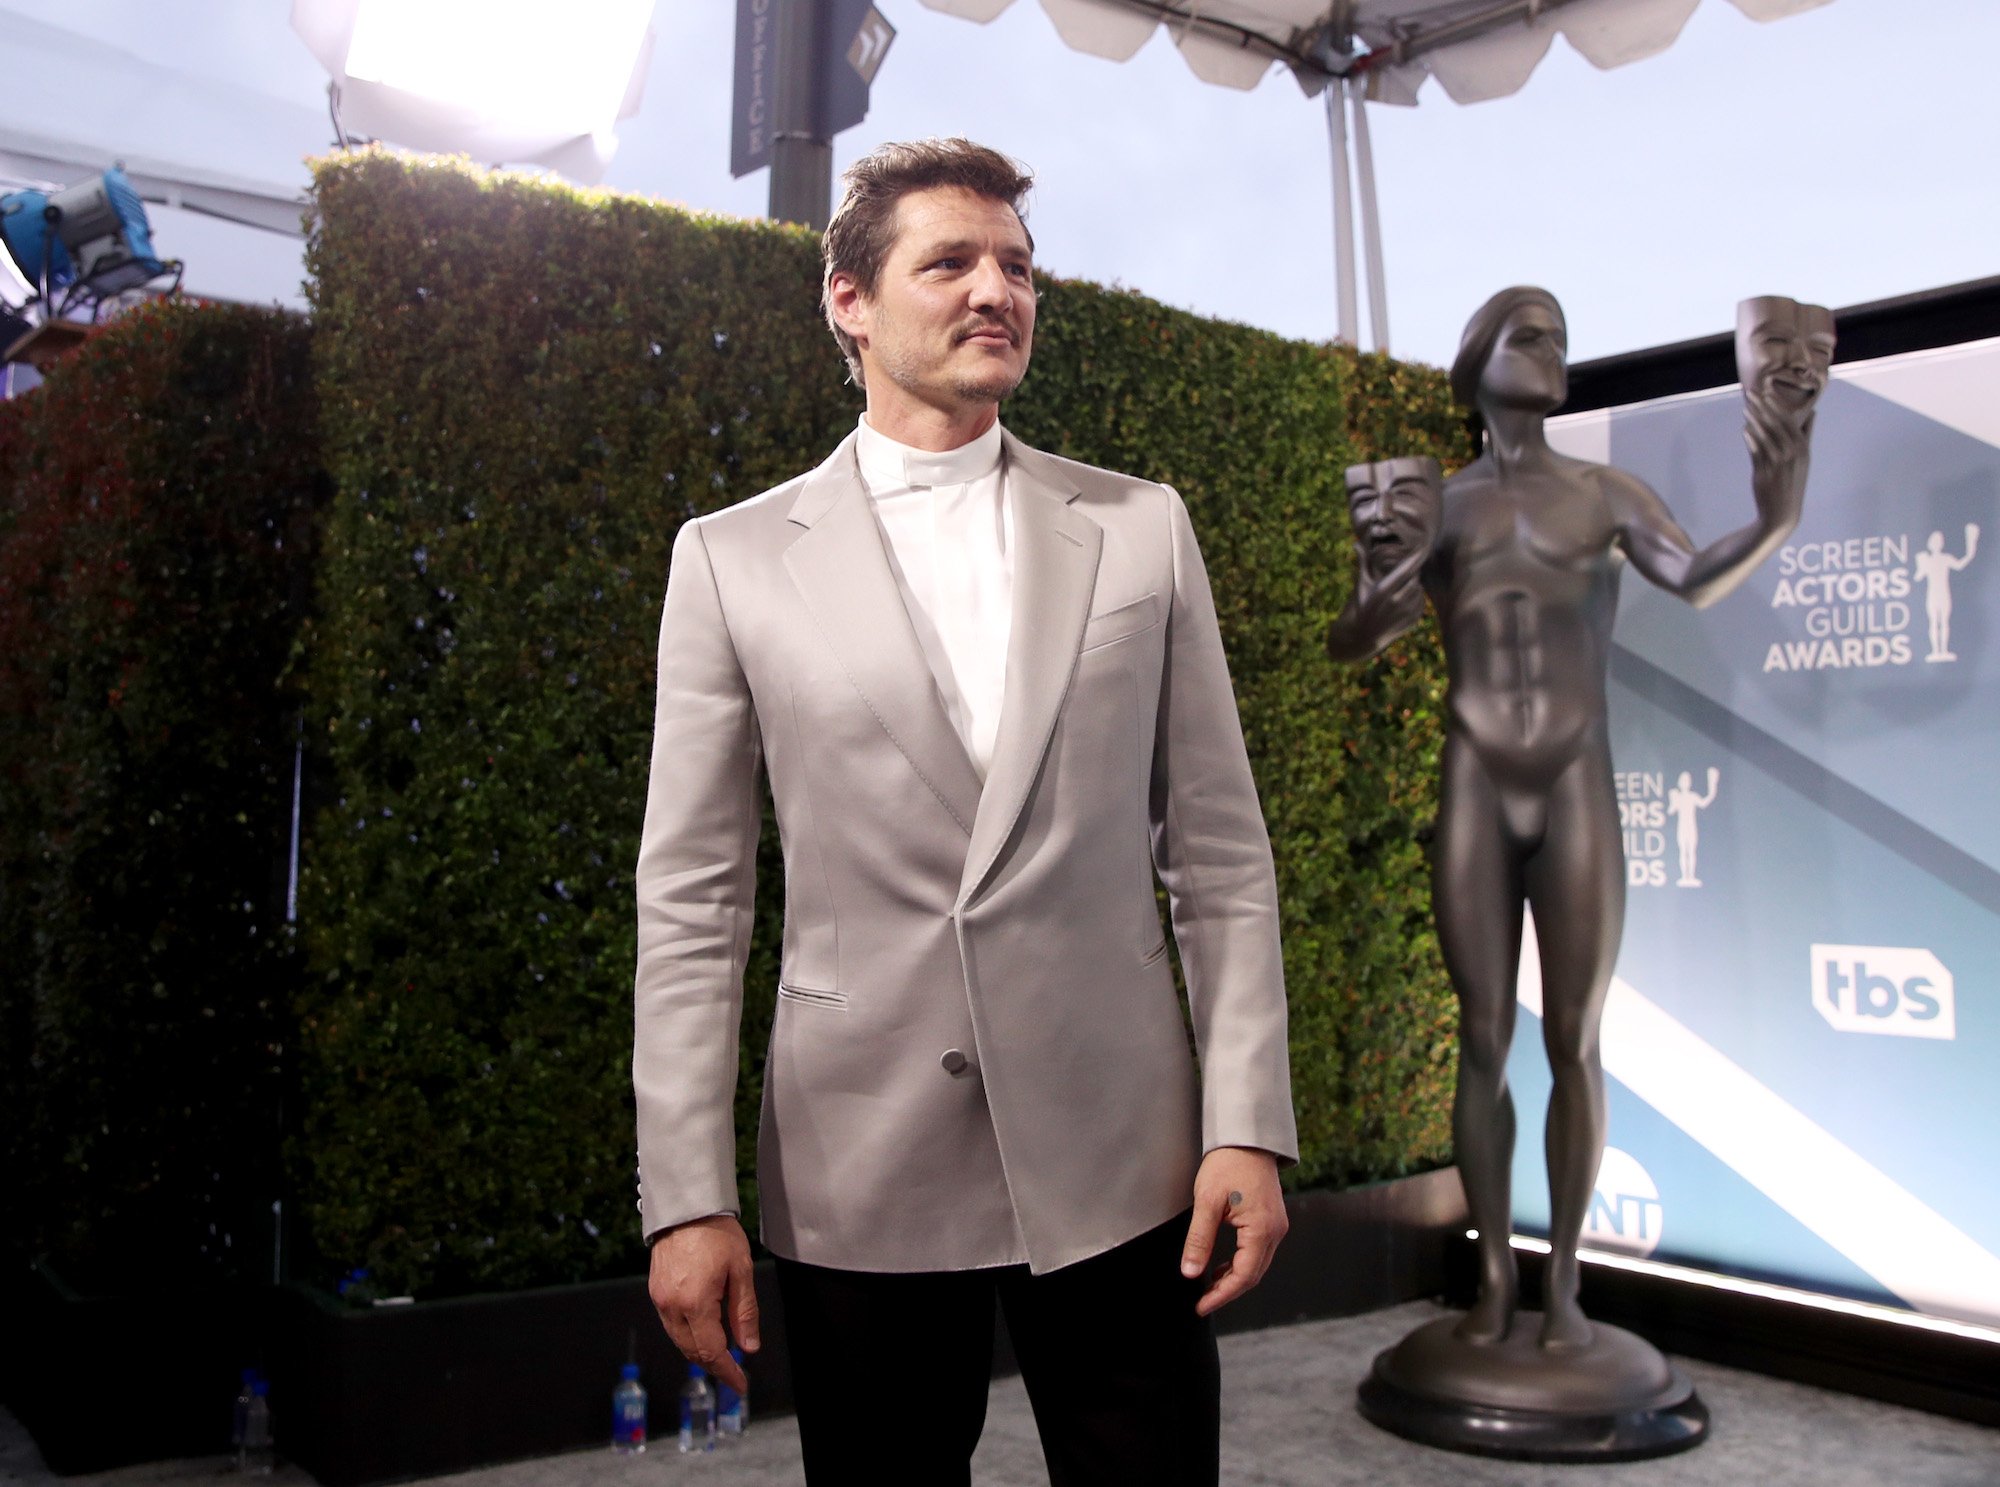 Pedro Pascal at the 26th Annual Screen Actors Guild Awards at The Shrine Auditorium on Jan. 19, 2020 in Los Angeles, California